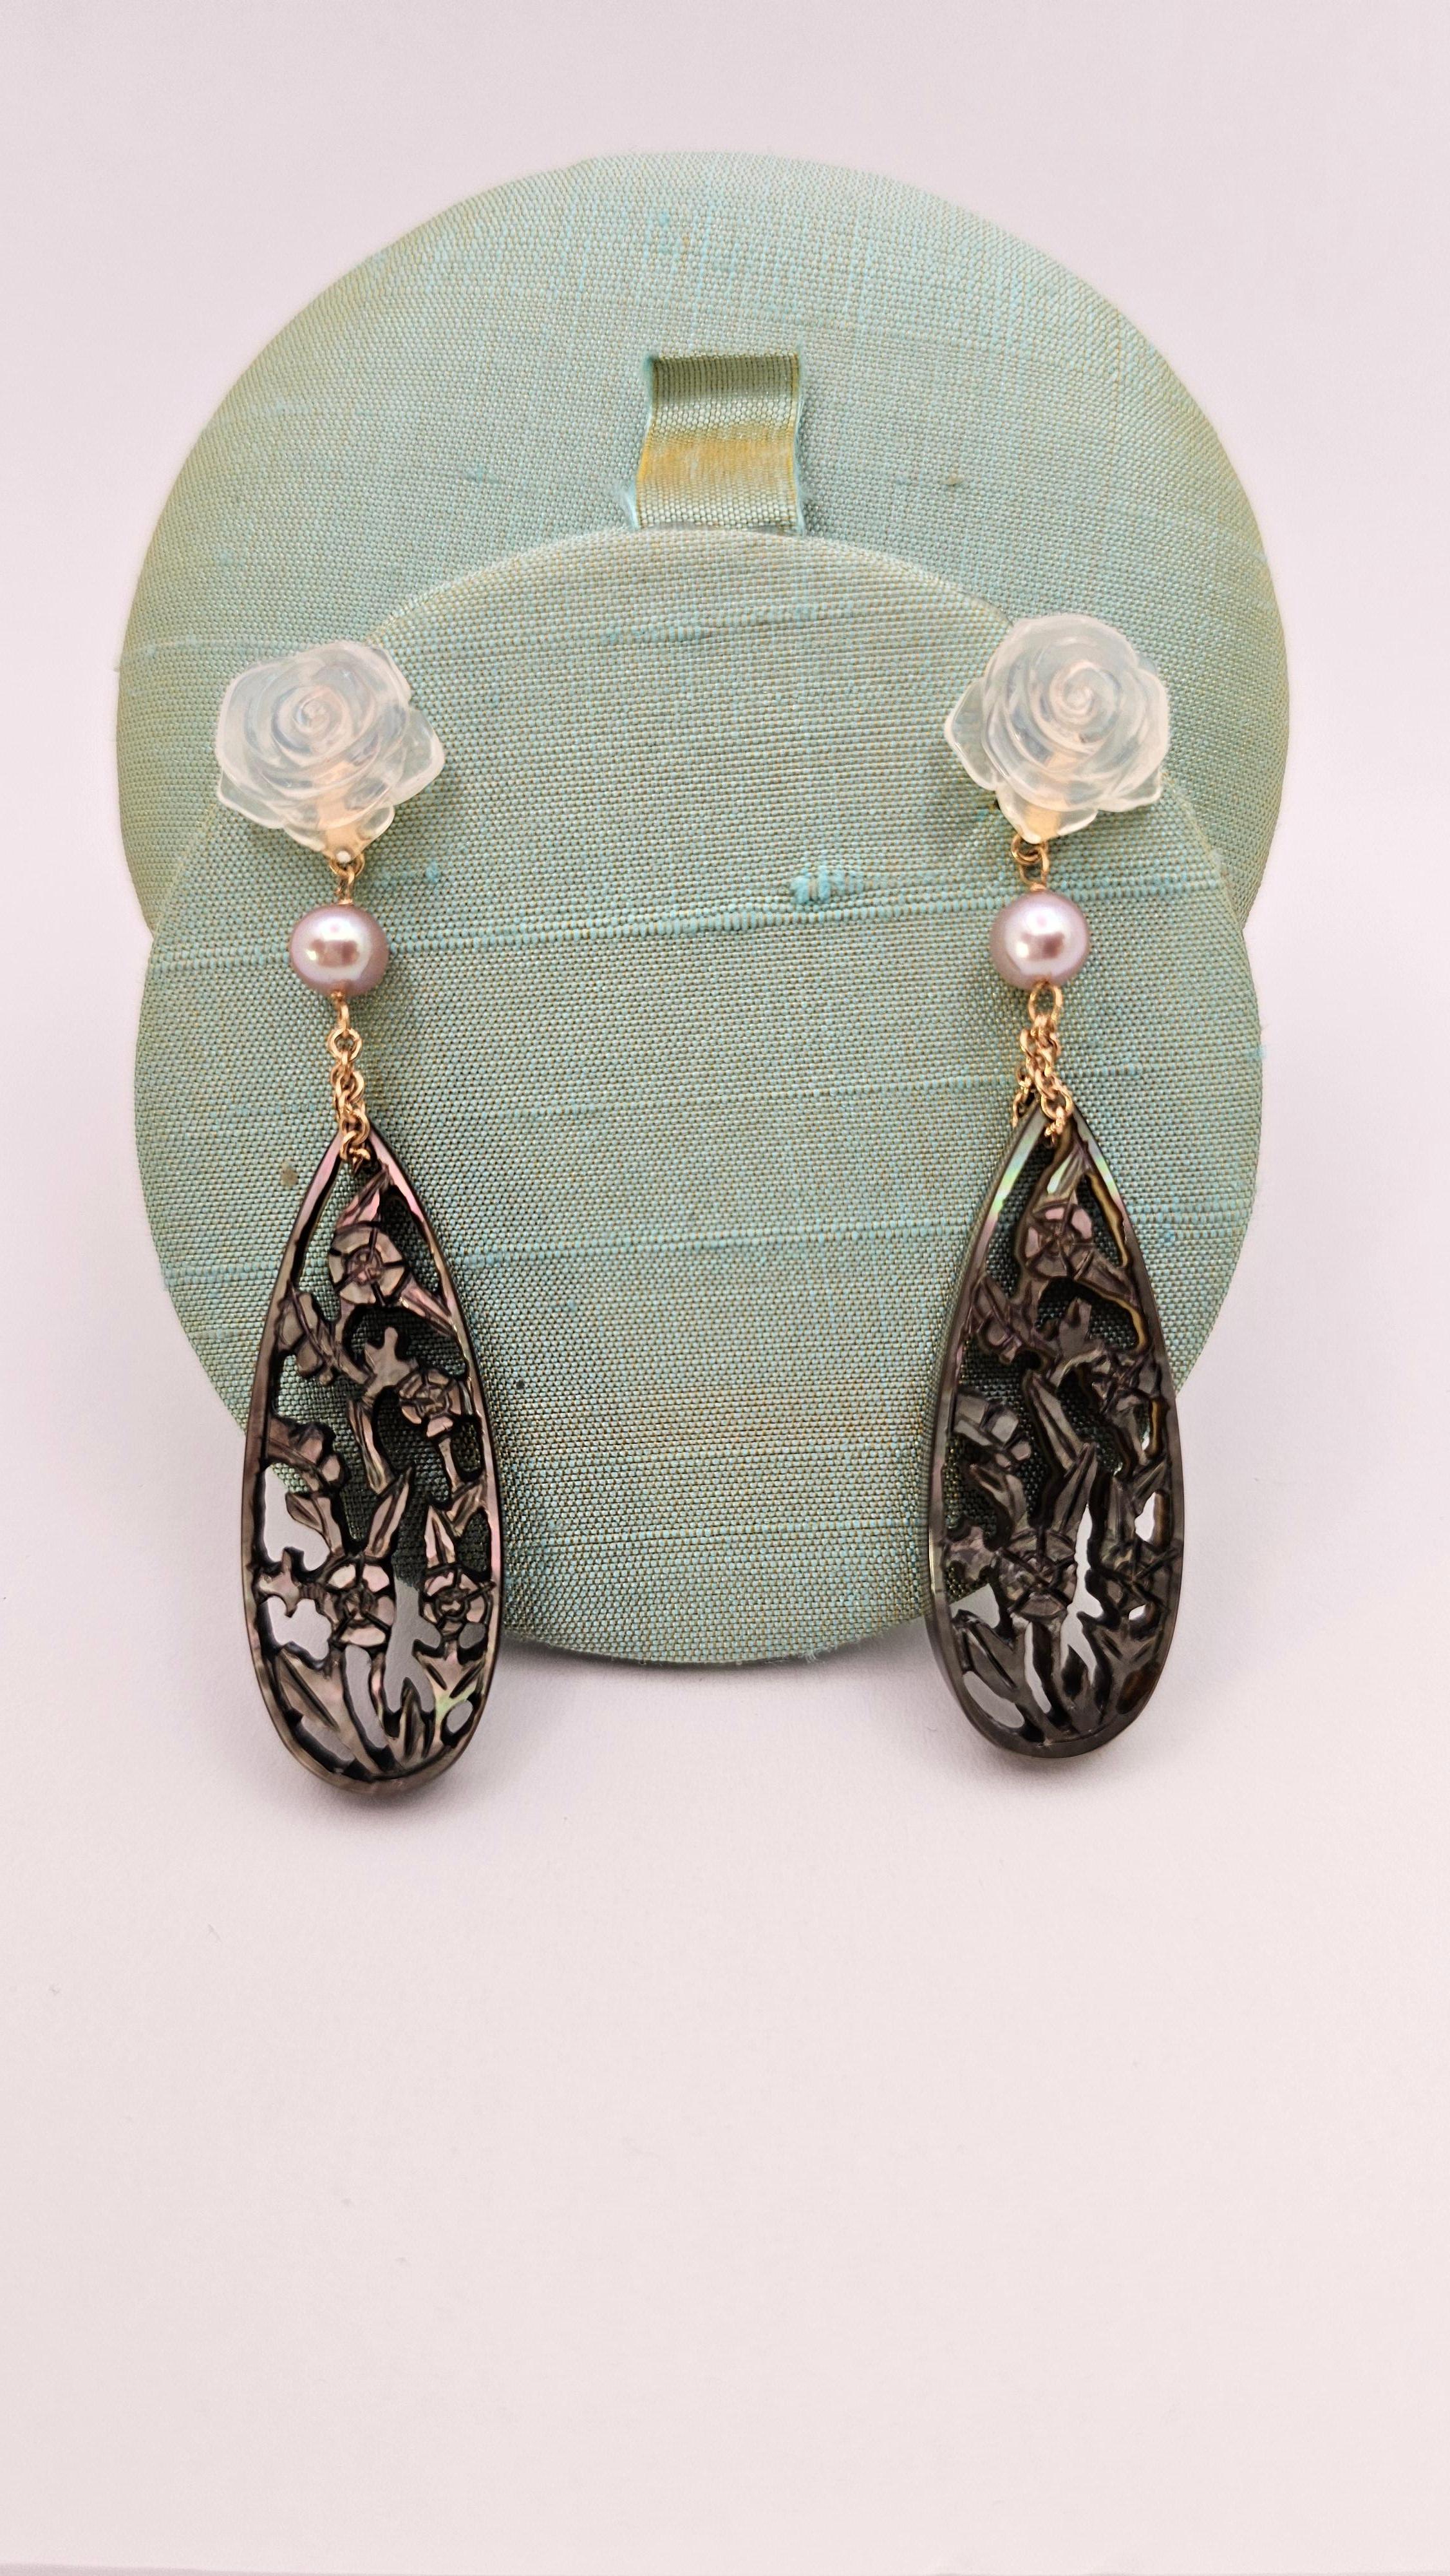 Dark Mother of Pearl, Quartz and Pearl Earrings in 18Kt Gold For Sale 2